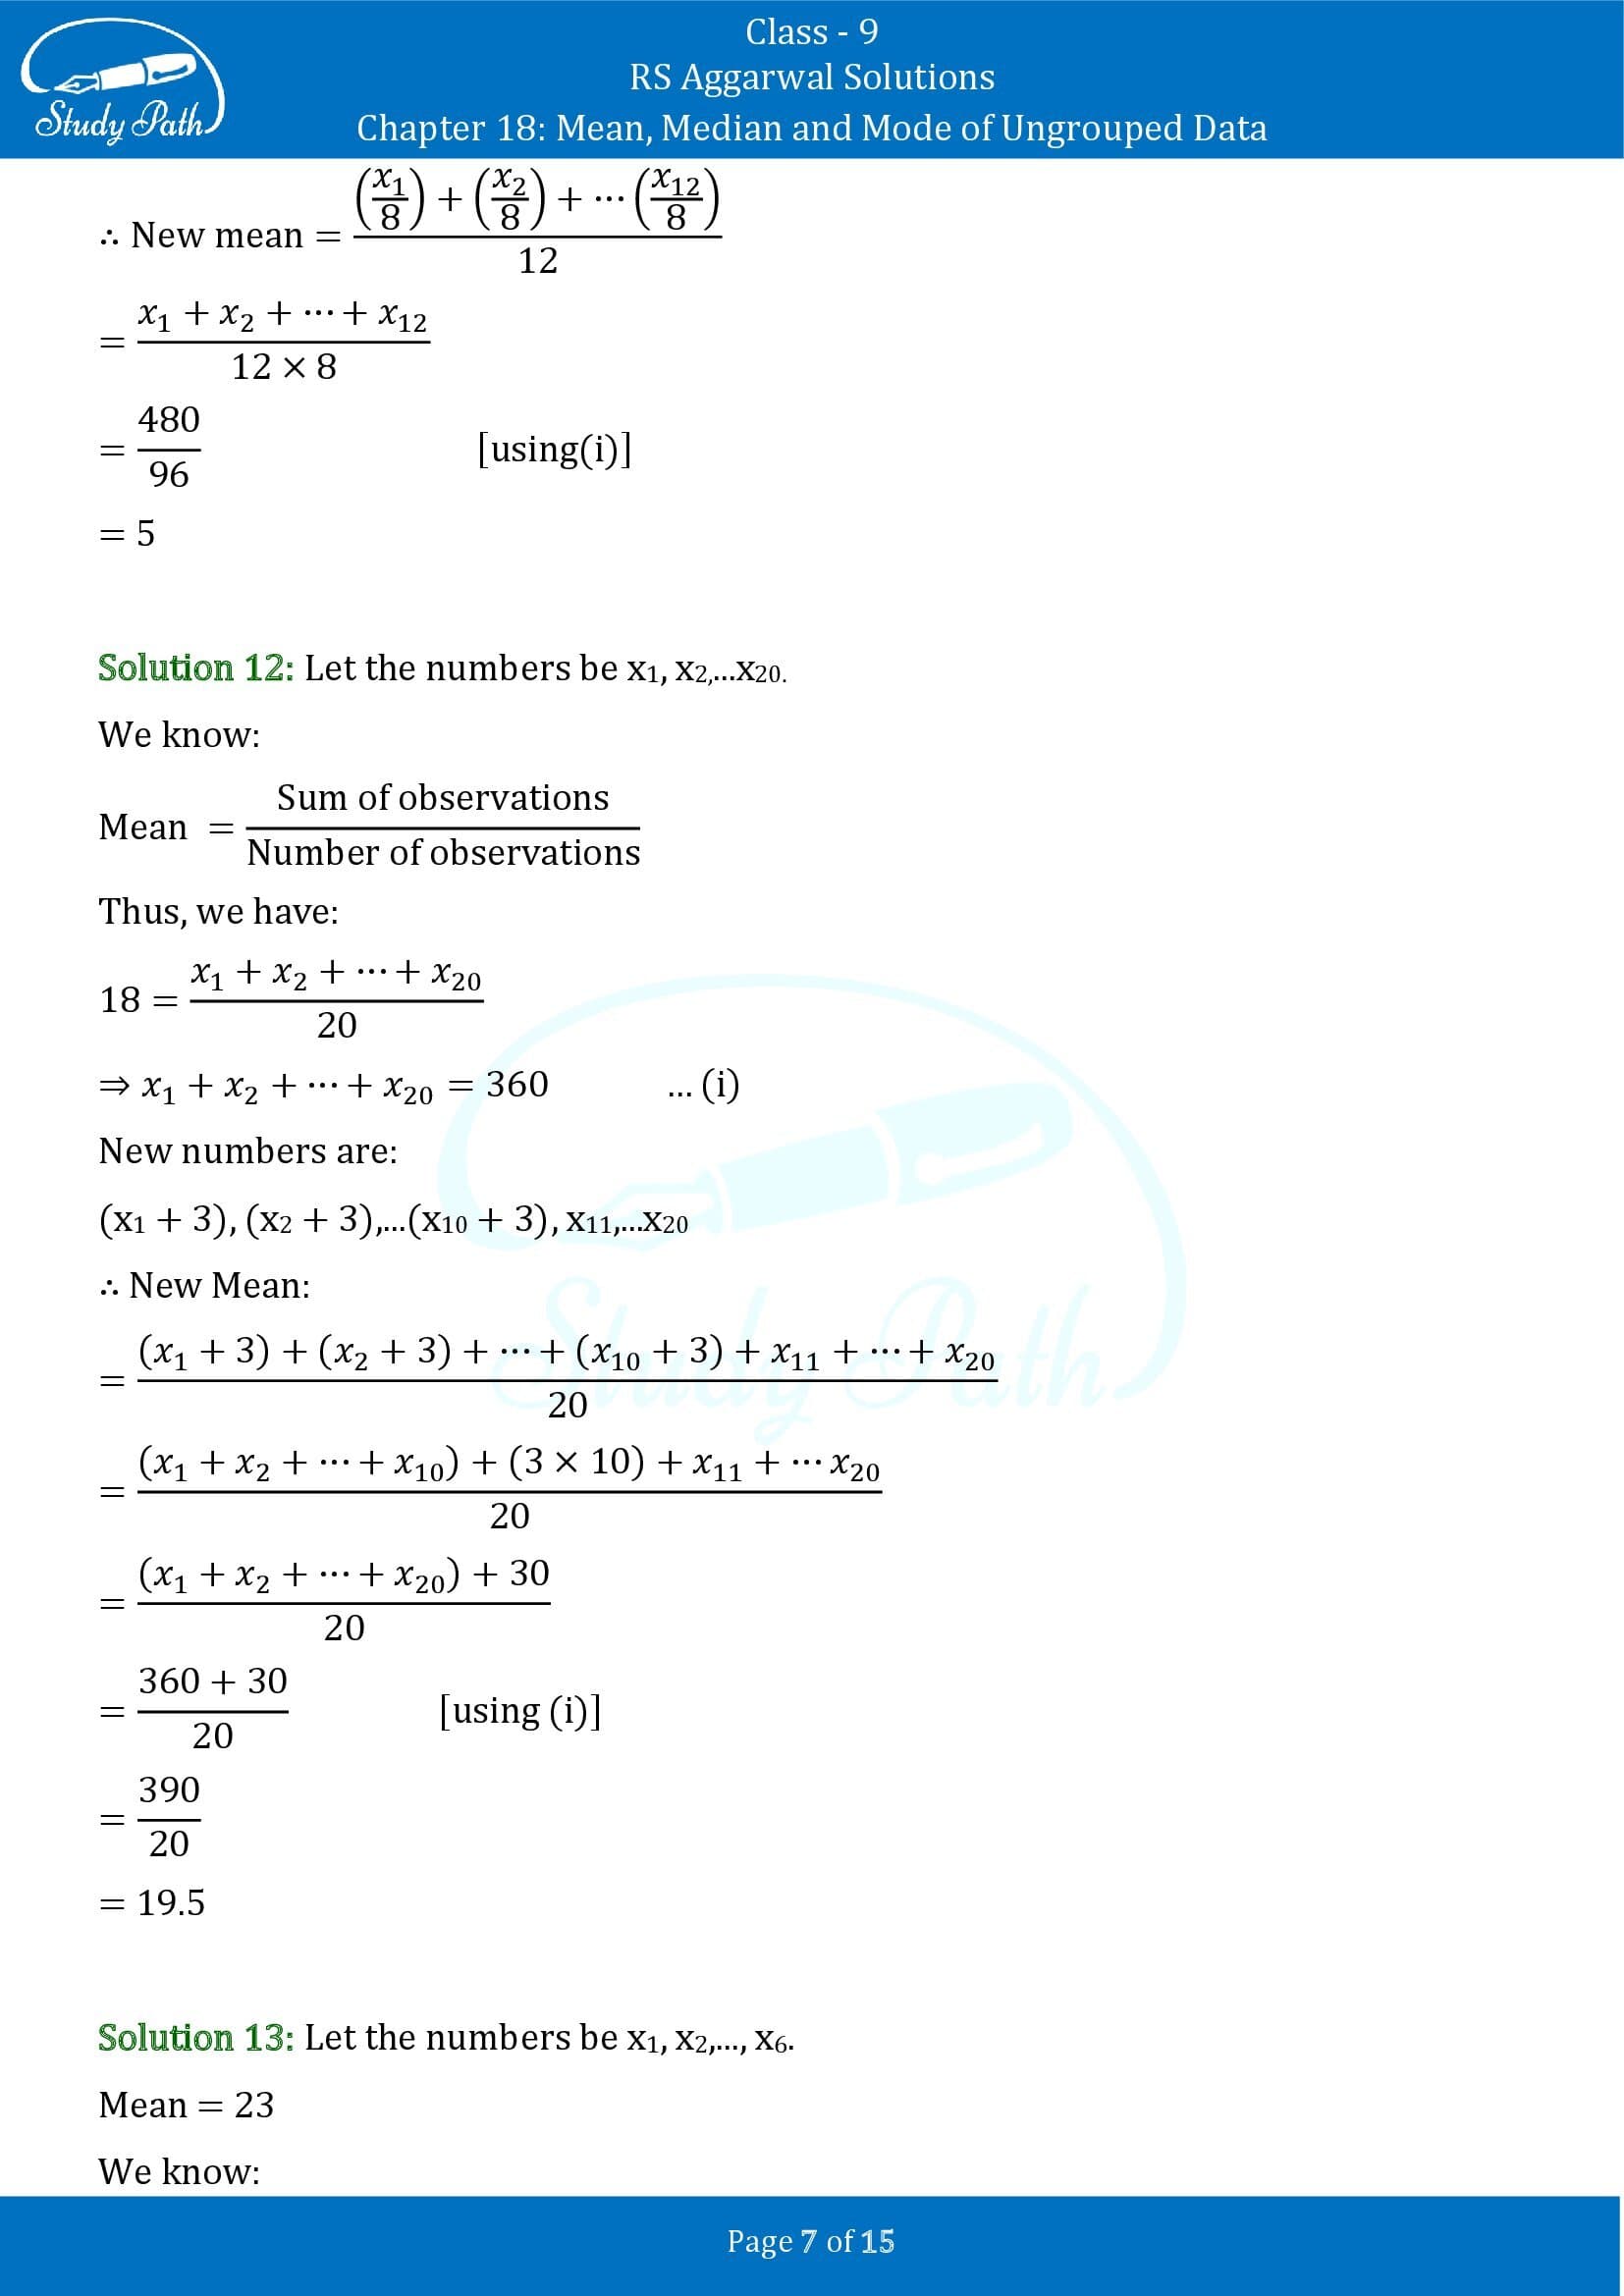 RS Aggarwal Solutions Class 9 Chapter 18 Mean Median and Mode of Ungrouped Data Exercise 18A 00007